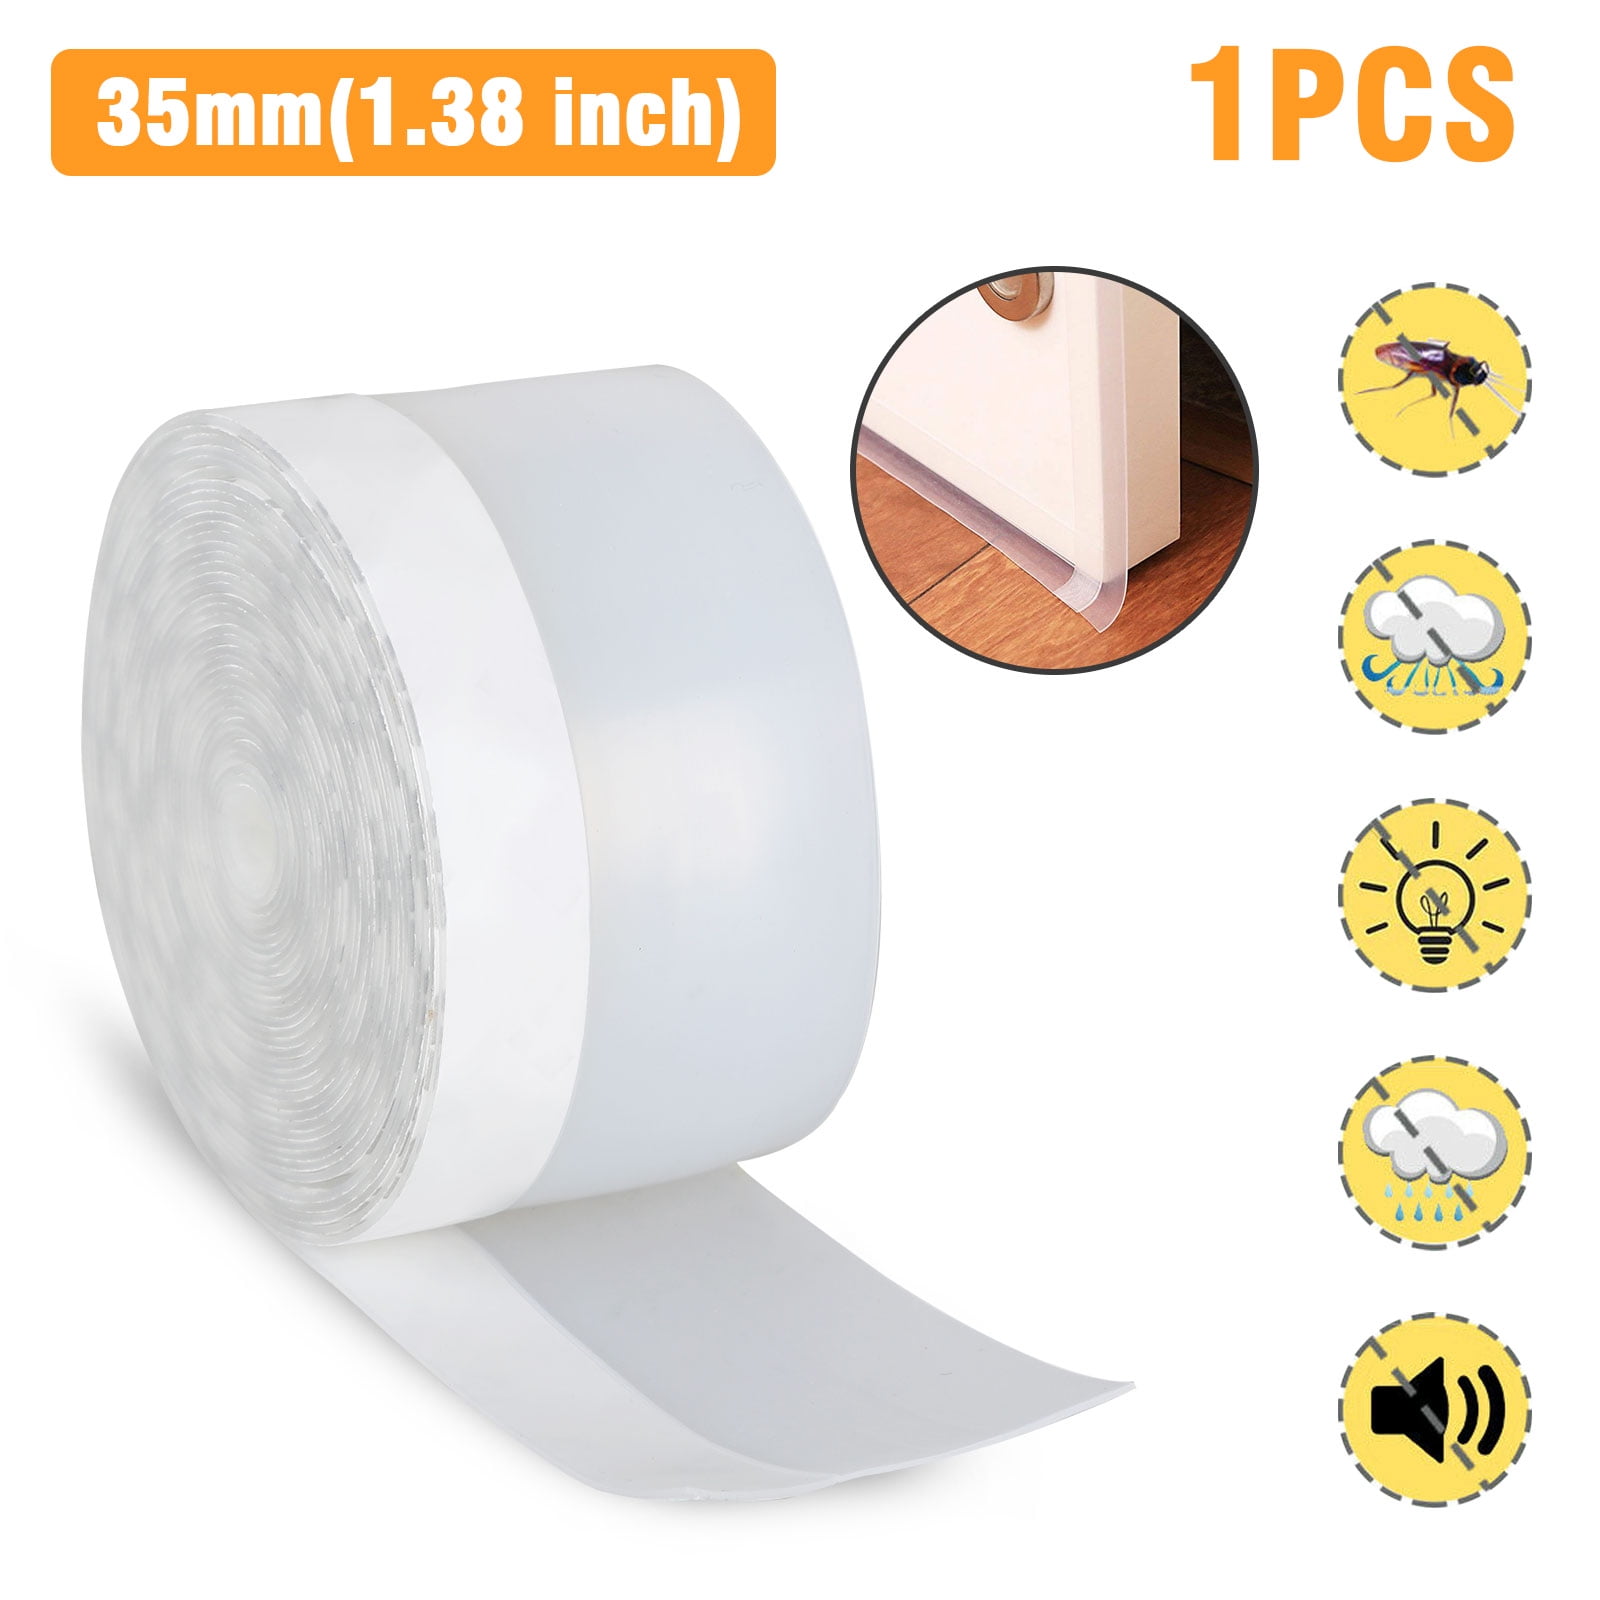 Self-Adhesive Silicone Sealing Strips for the Bottom and Sides of the Shower Glass Door 1.8 Inches Wide 16.4 Feet Upgrade Weather Stripping for Doors and Windows Transparent